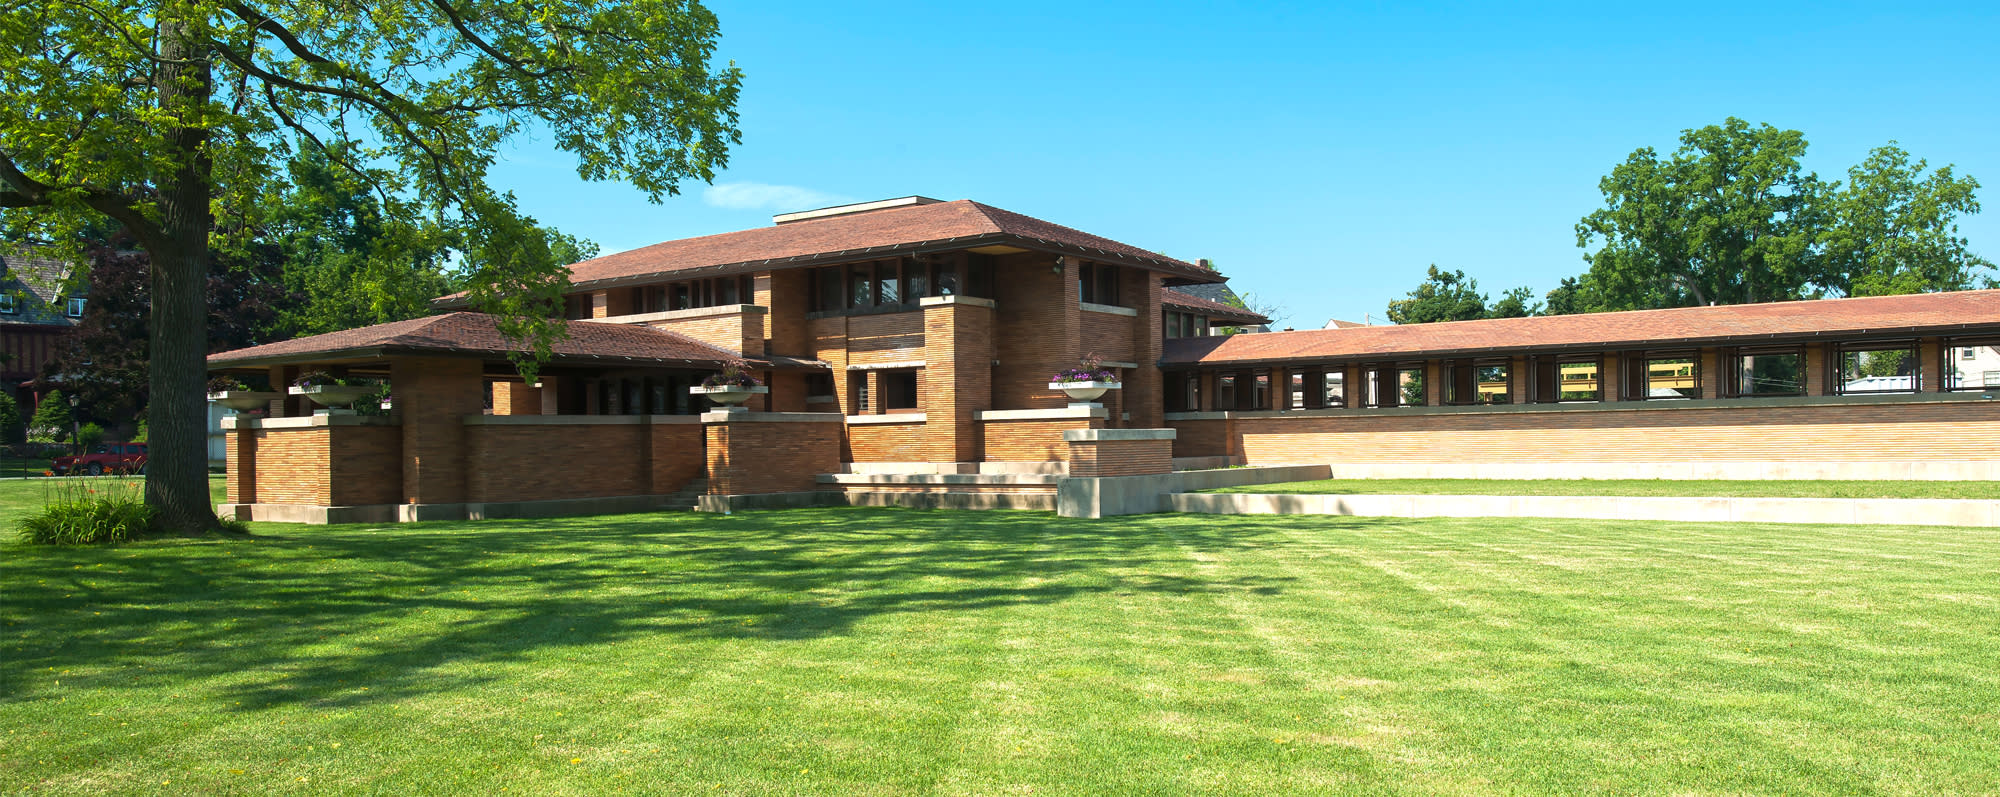 The exterior of Frank Lloyd Wright's Martin House on a sunny day